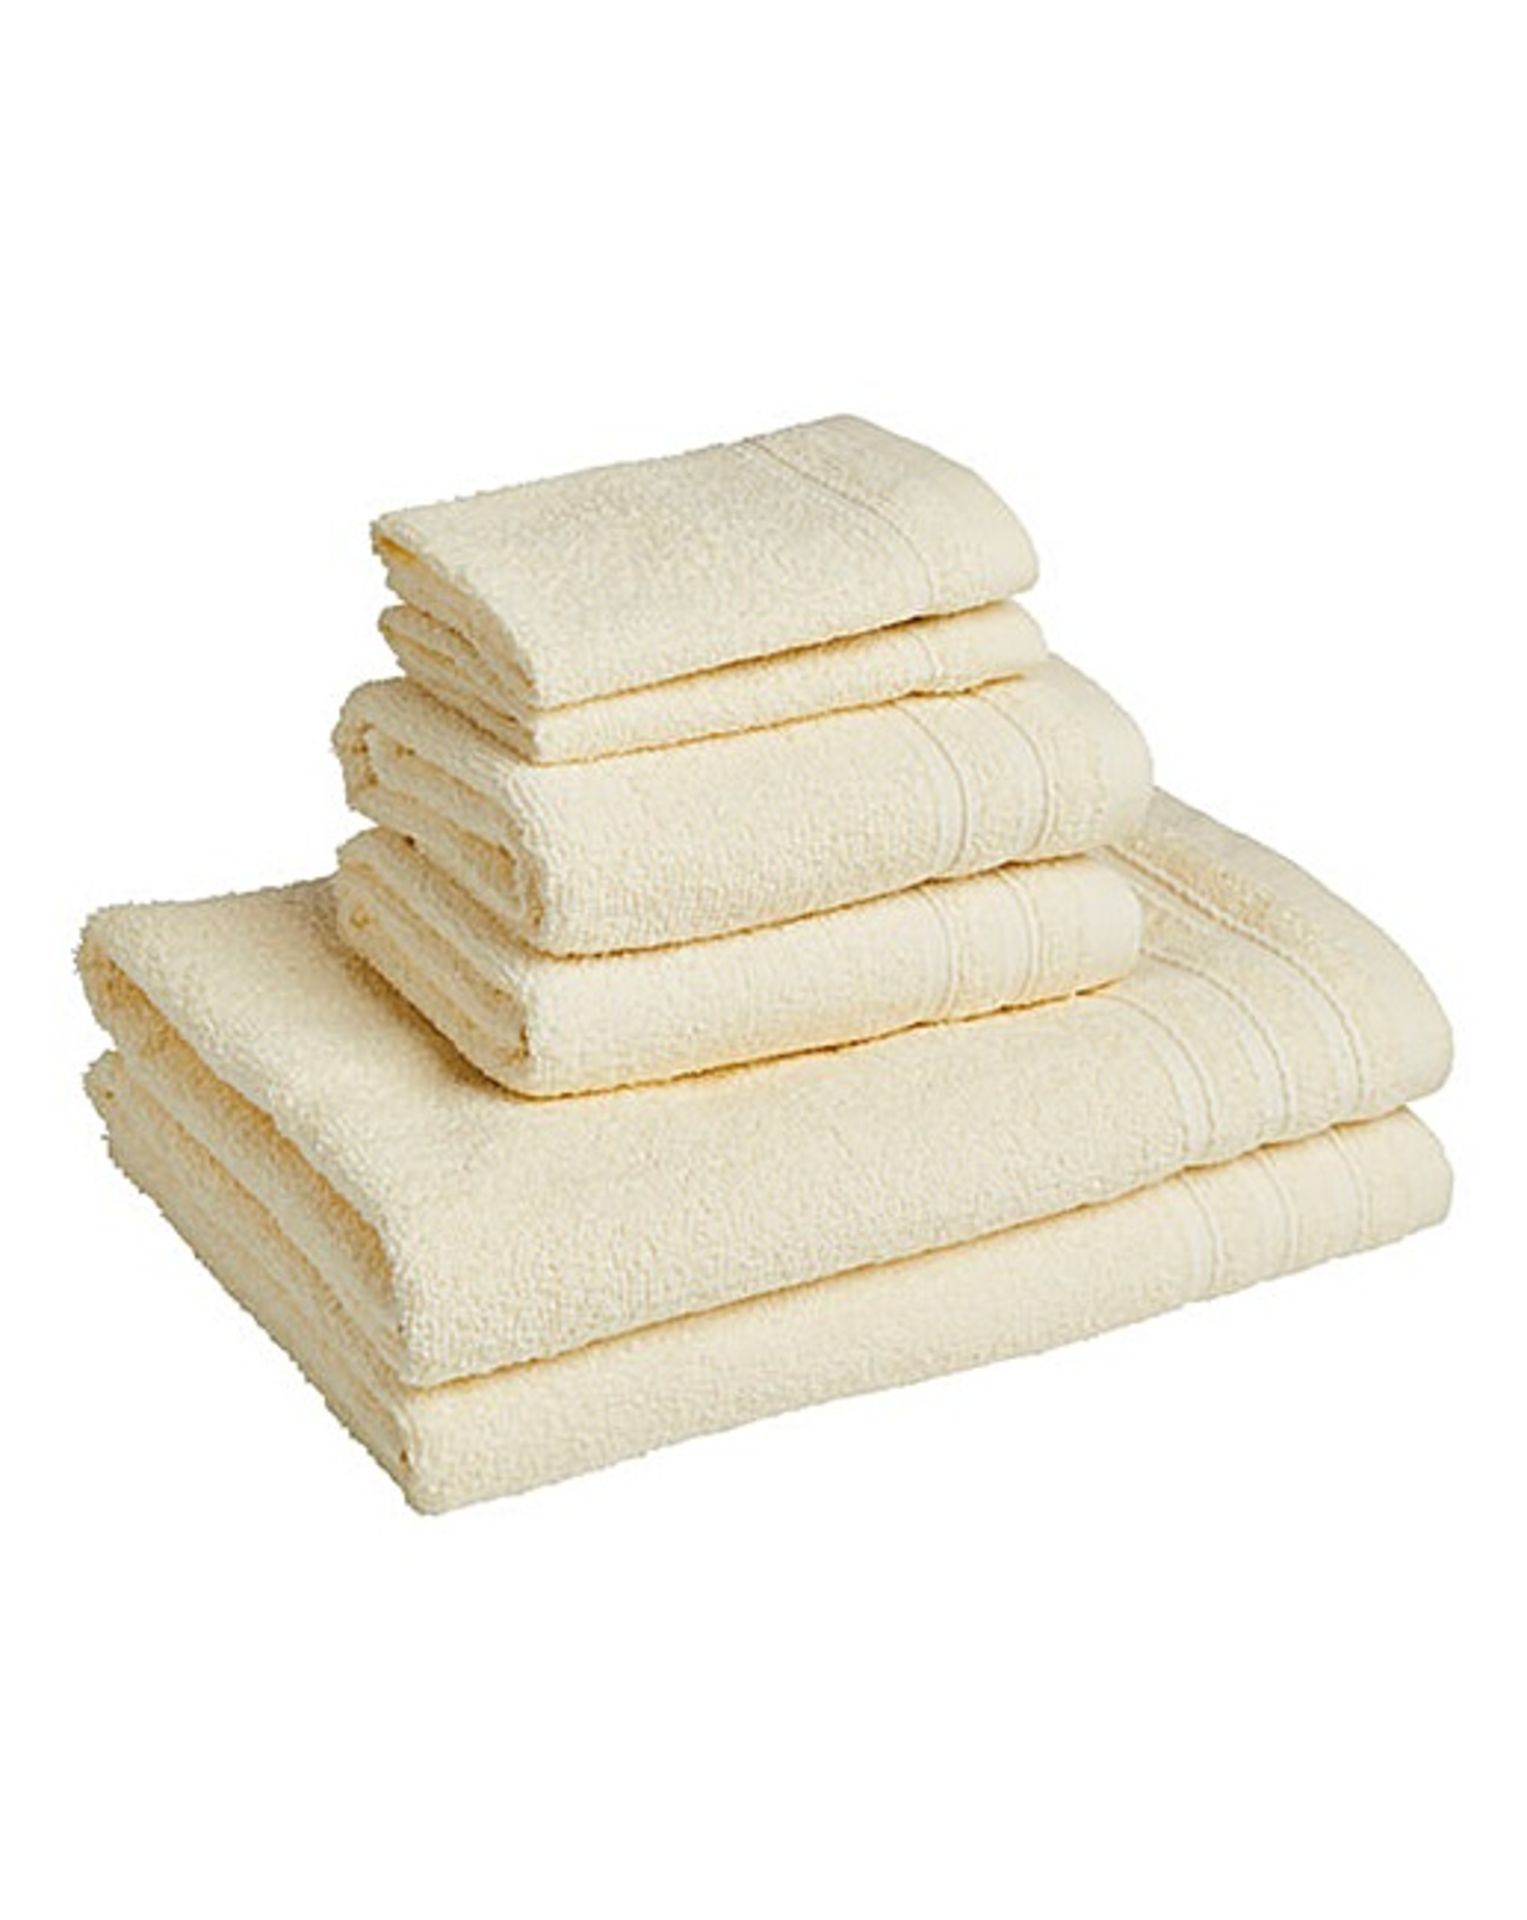 V Brand New Six Piece Cream Towel Bale Set Including Two Bath Towels-Two Hand Towels & Two Face